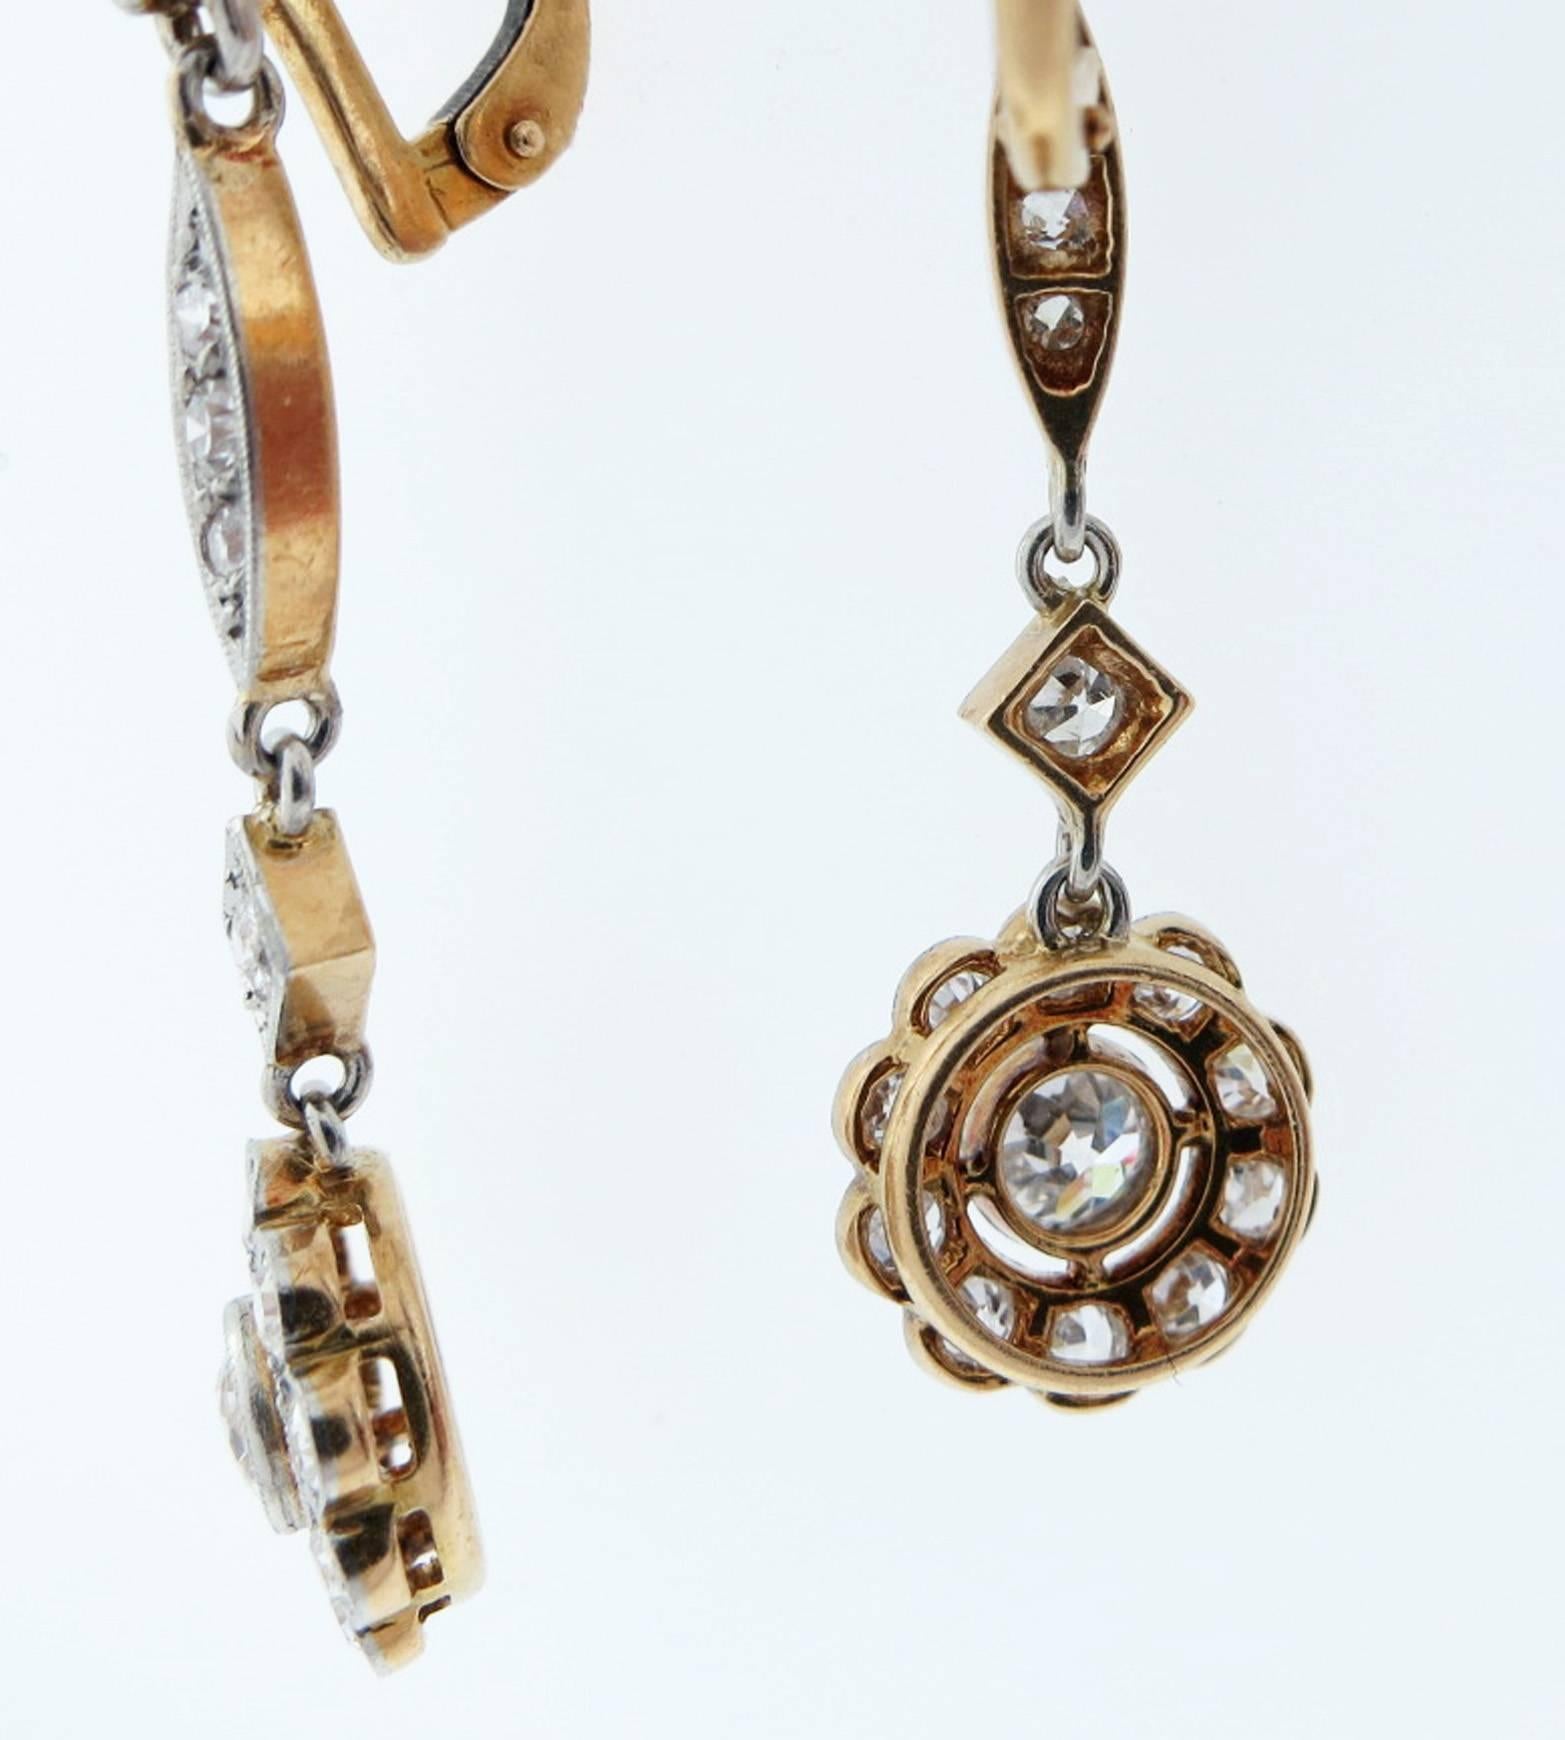 Finely made antique French back platinum top and 18kt. yellow gold back diamond articulated drop earrings. Each earring measures approx 1.75 inches in length and are bead and bezel set in mill grained platinum with 16 old mine and European cut